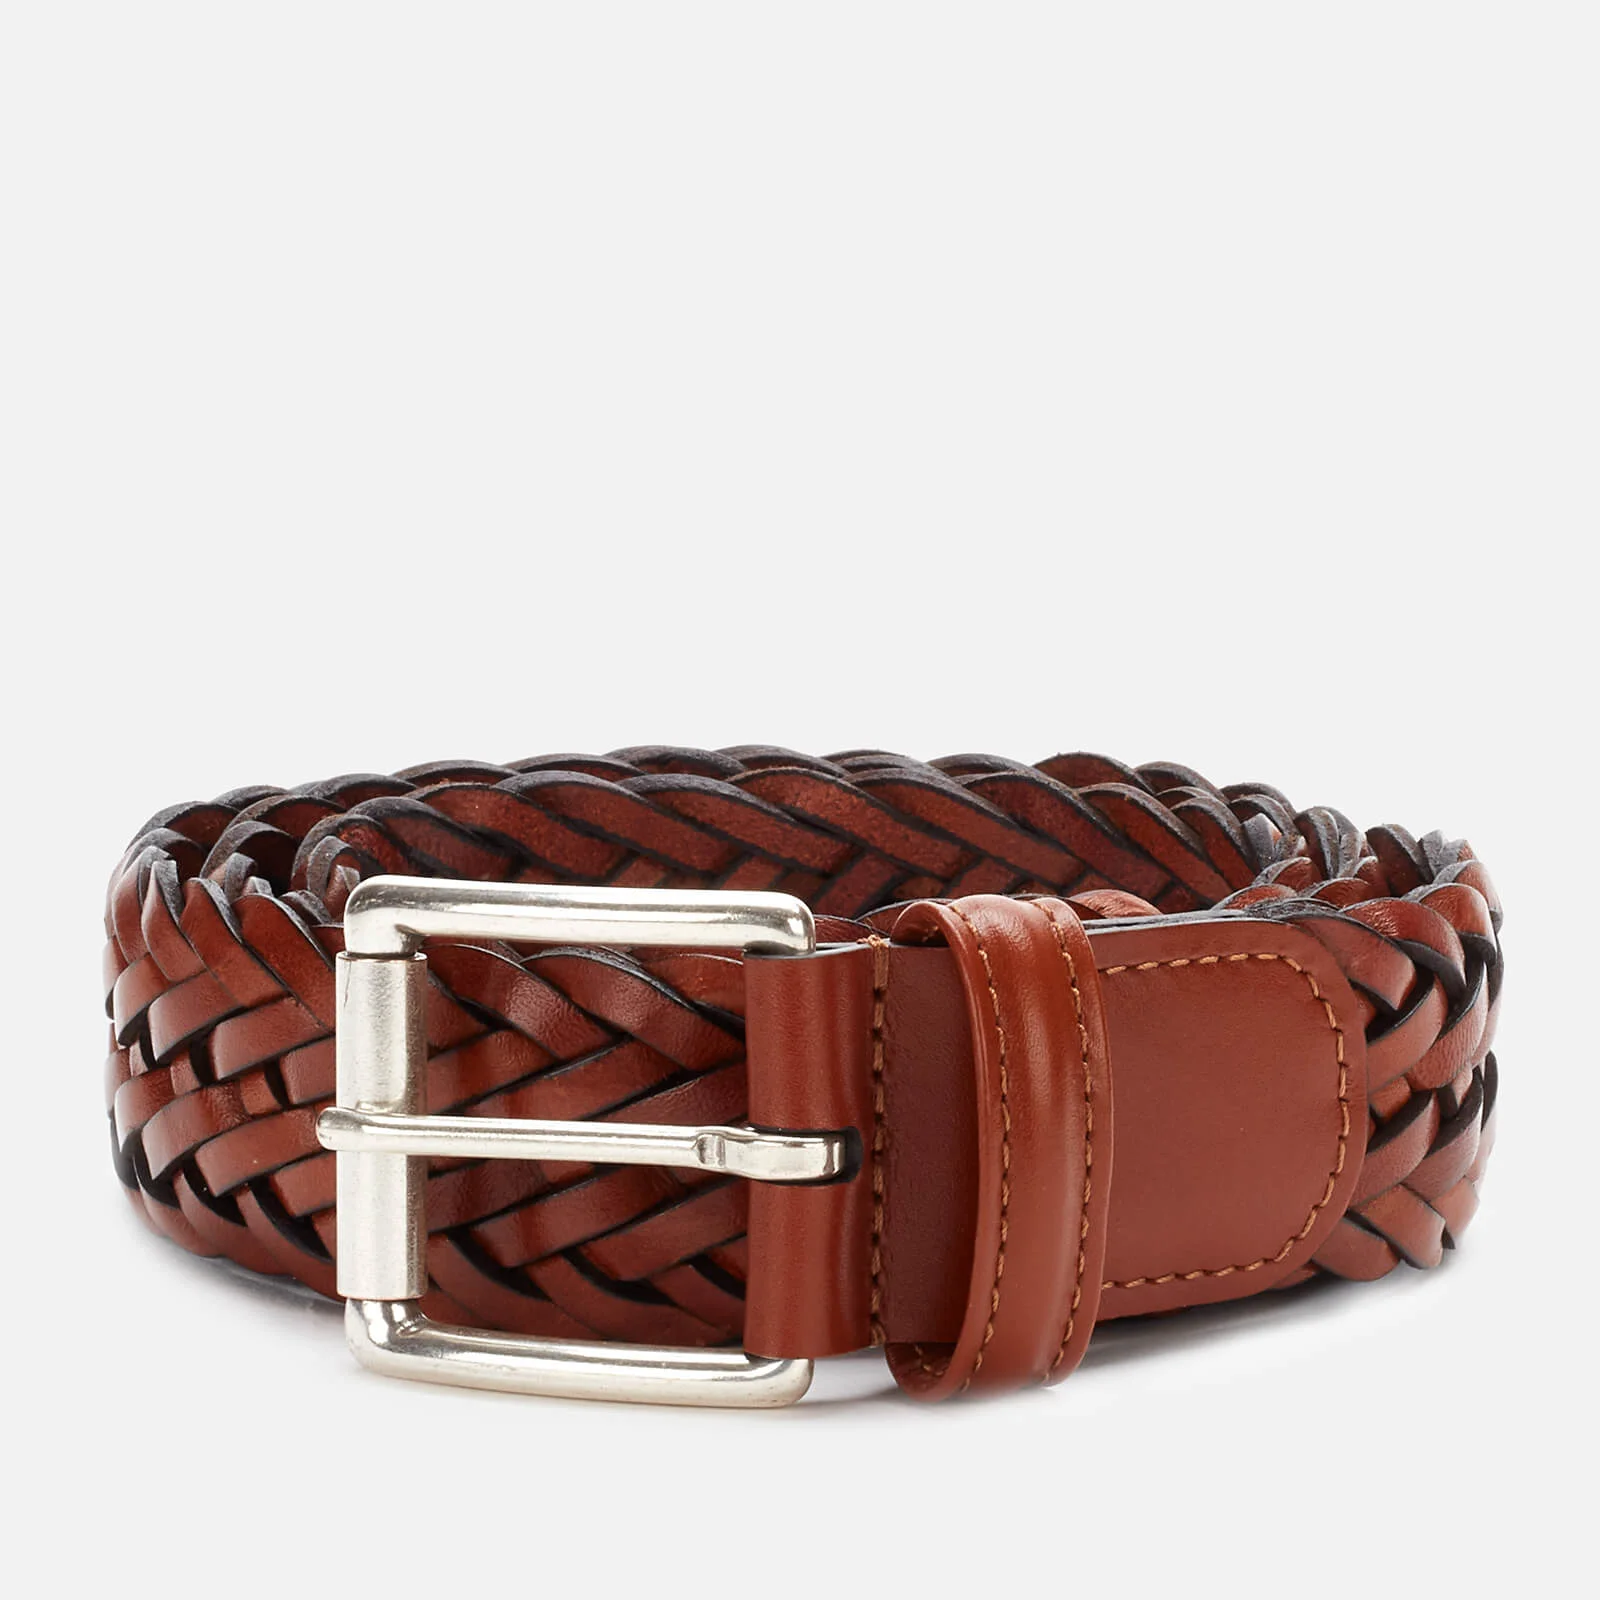 Anderson's Men's Woven Leather Belt - Brown Image 1